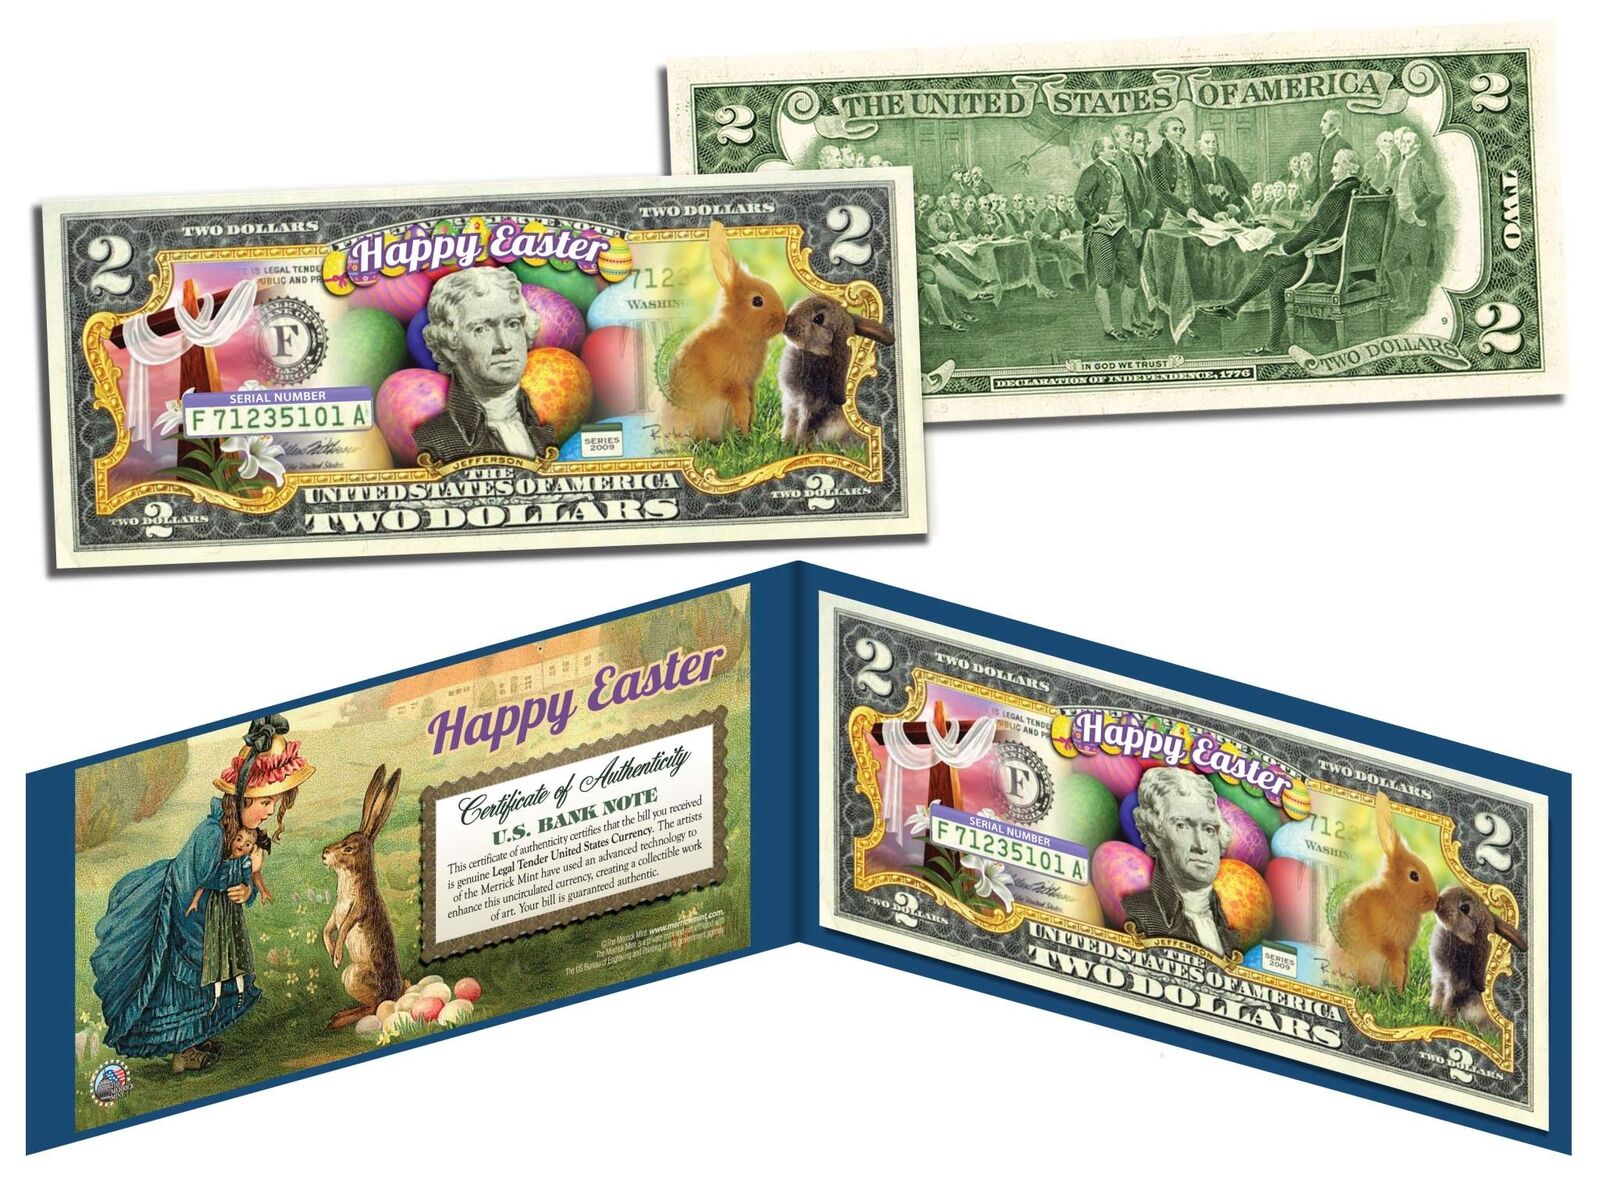 HAPPY EASTER * Easter Eggs & Easter Bunny  * Colorized $2 Bill U.S. Legal Tender